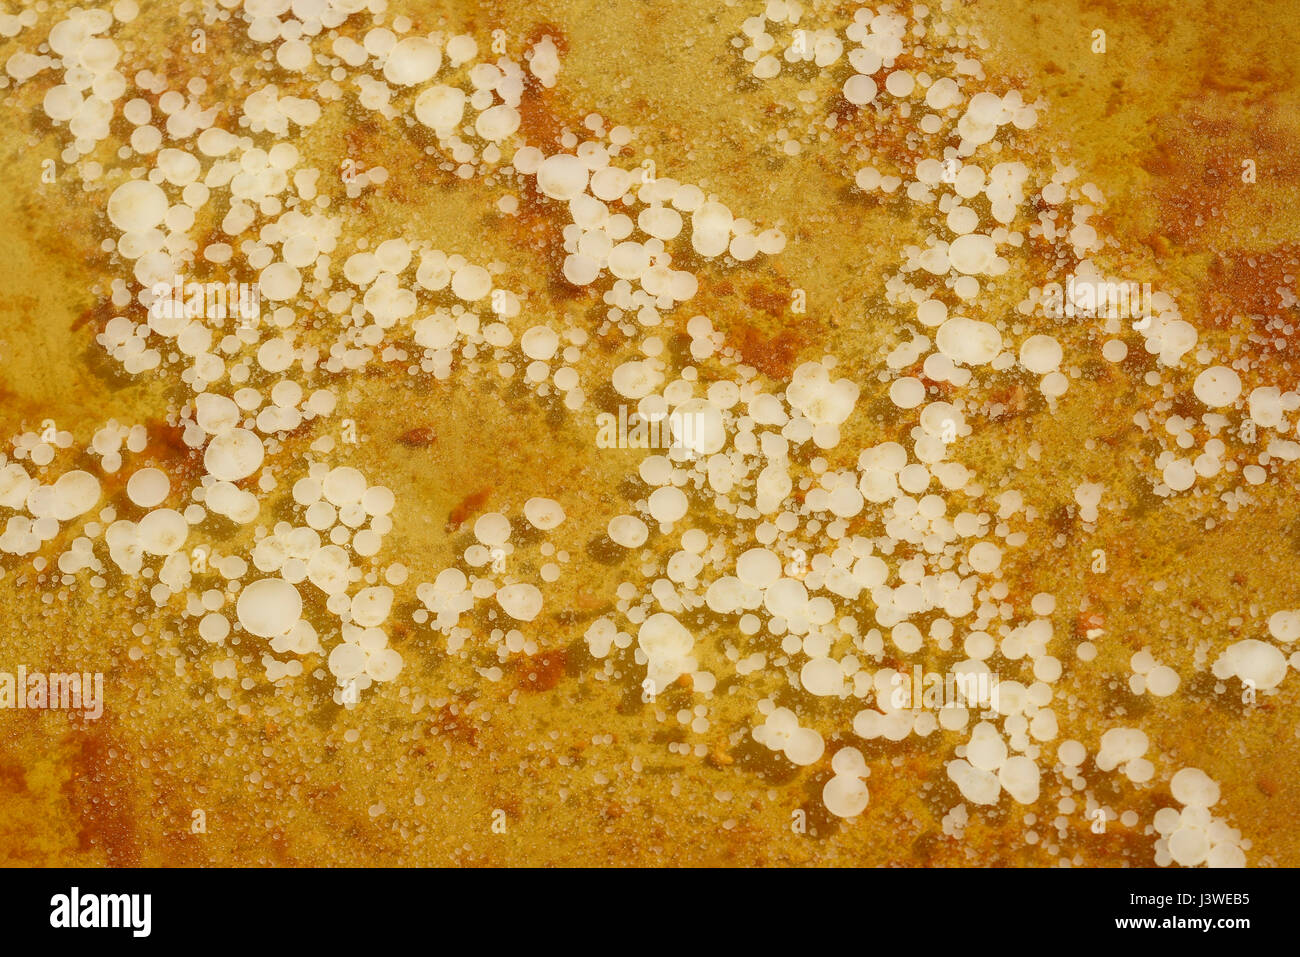 Close up detail of oil fat and water in a frying pan Stock Photo